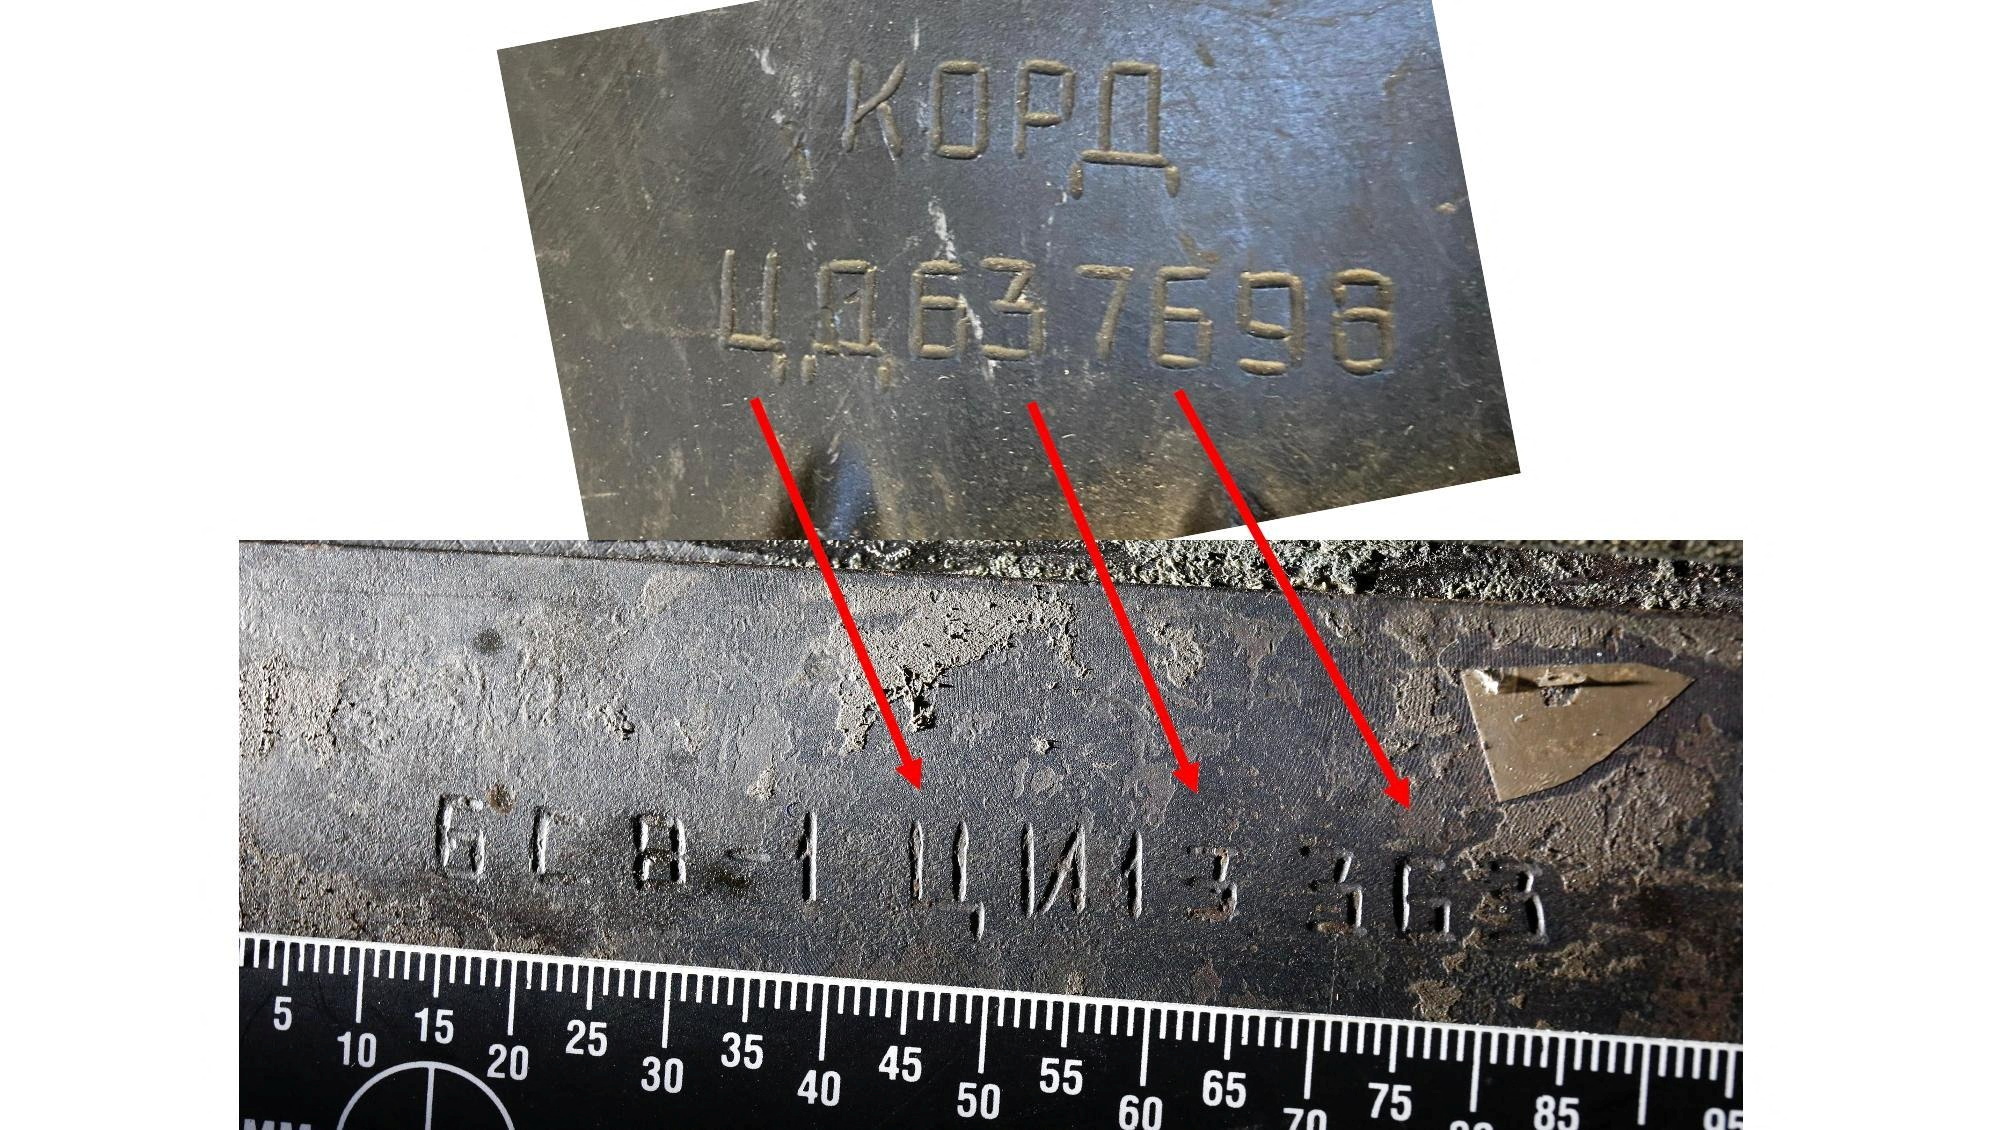 A comparison of etchings on a Kord machine gun seen by Reuters in Kyiv (TOP), and a high-caliber rifle examined in Ukraine 2018 by research group Conflict Armament Research, which determined the weapon was produced at the Degtyarev plant. The group said the similarity between the characters is "pretty striking." Reuters could not independently corroborate that the weapon seen by Reuters was recovered from invading Russian forces.   Conflict Armament Research/via REUTERS  